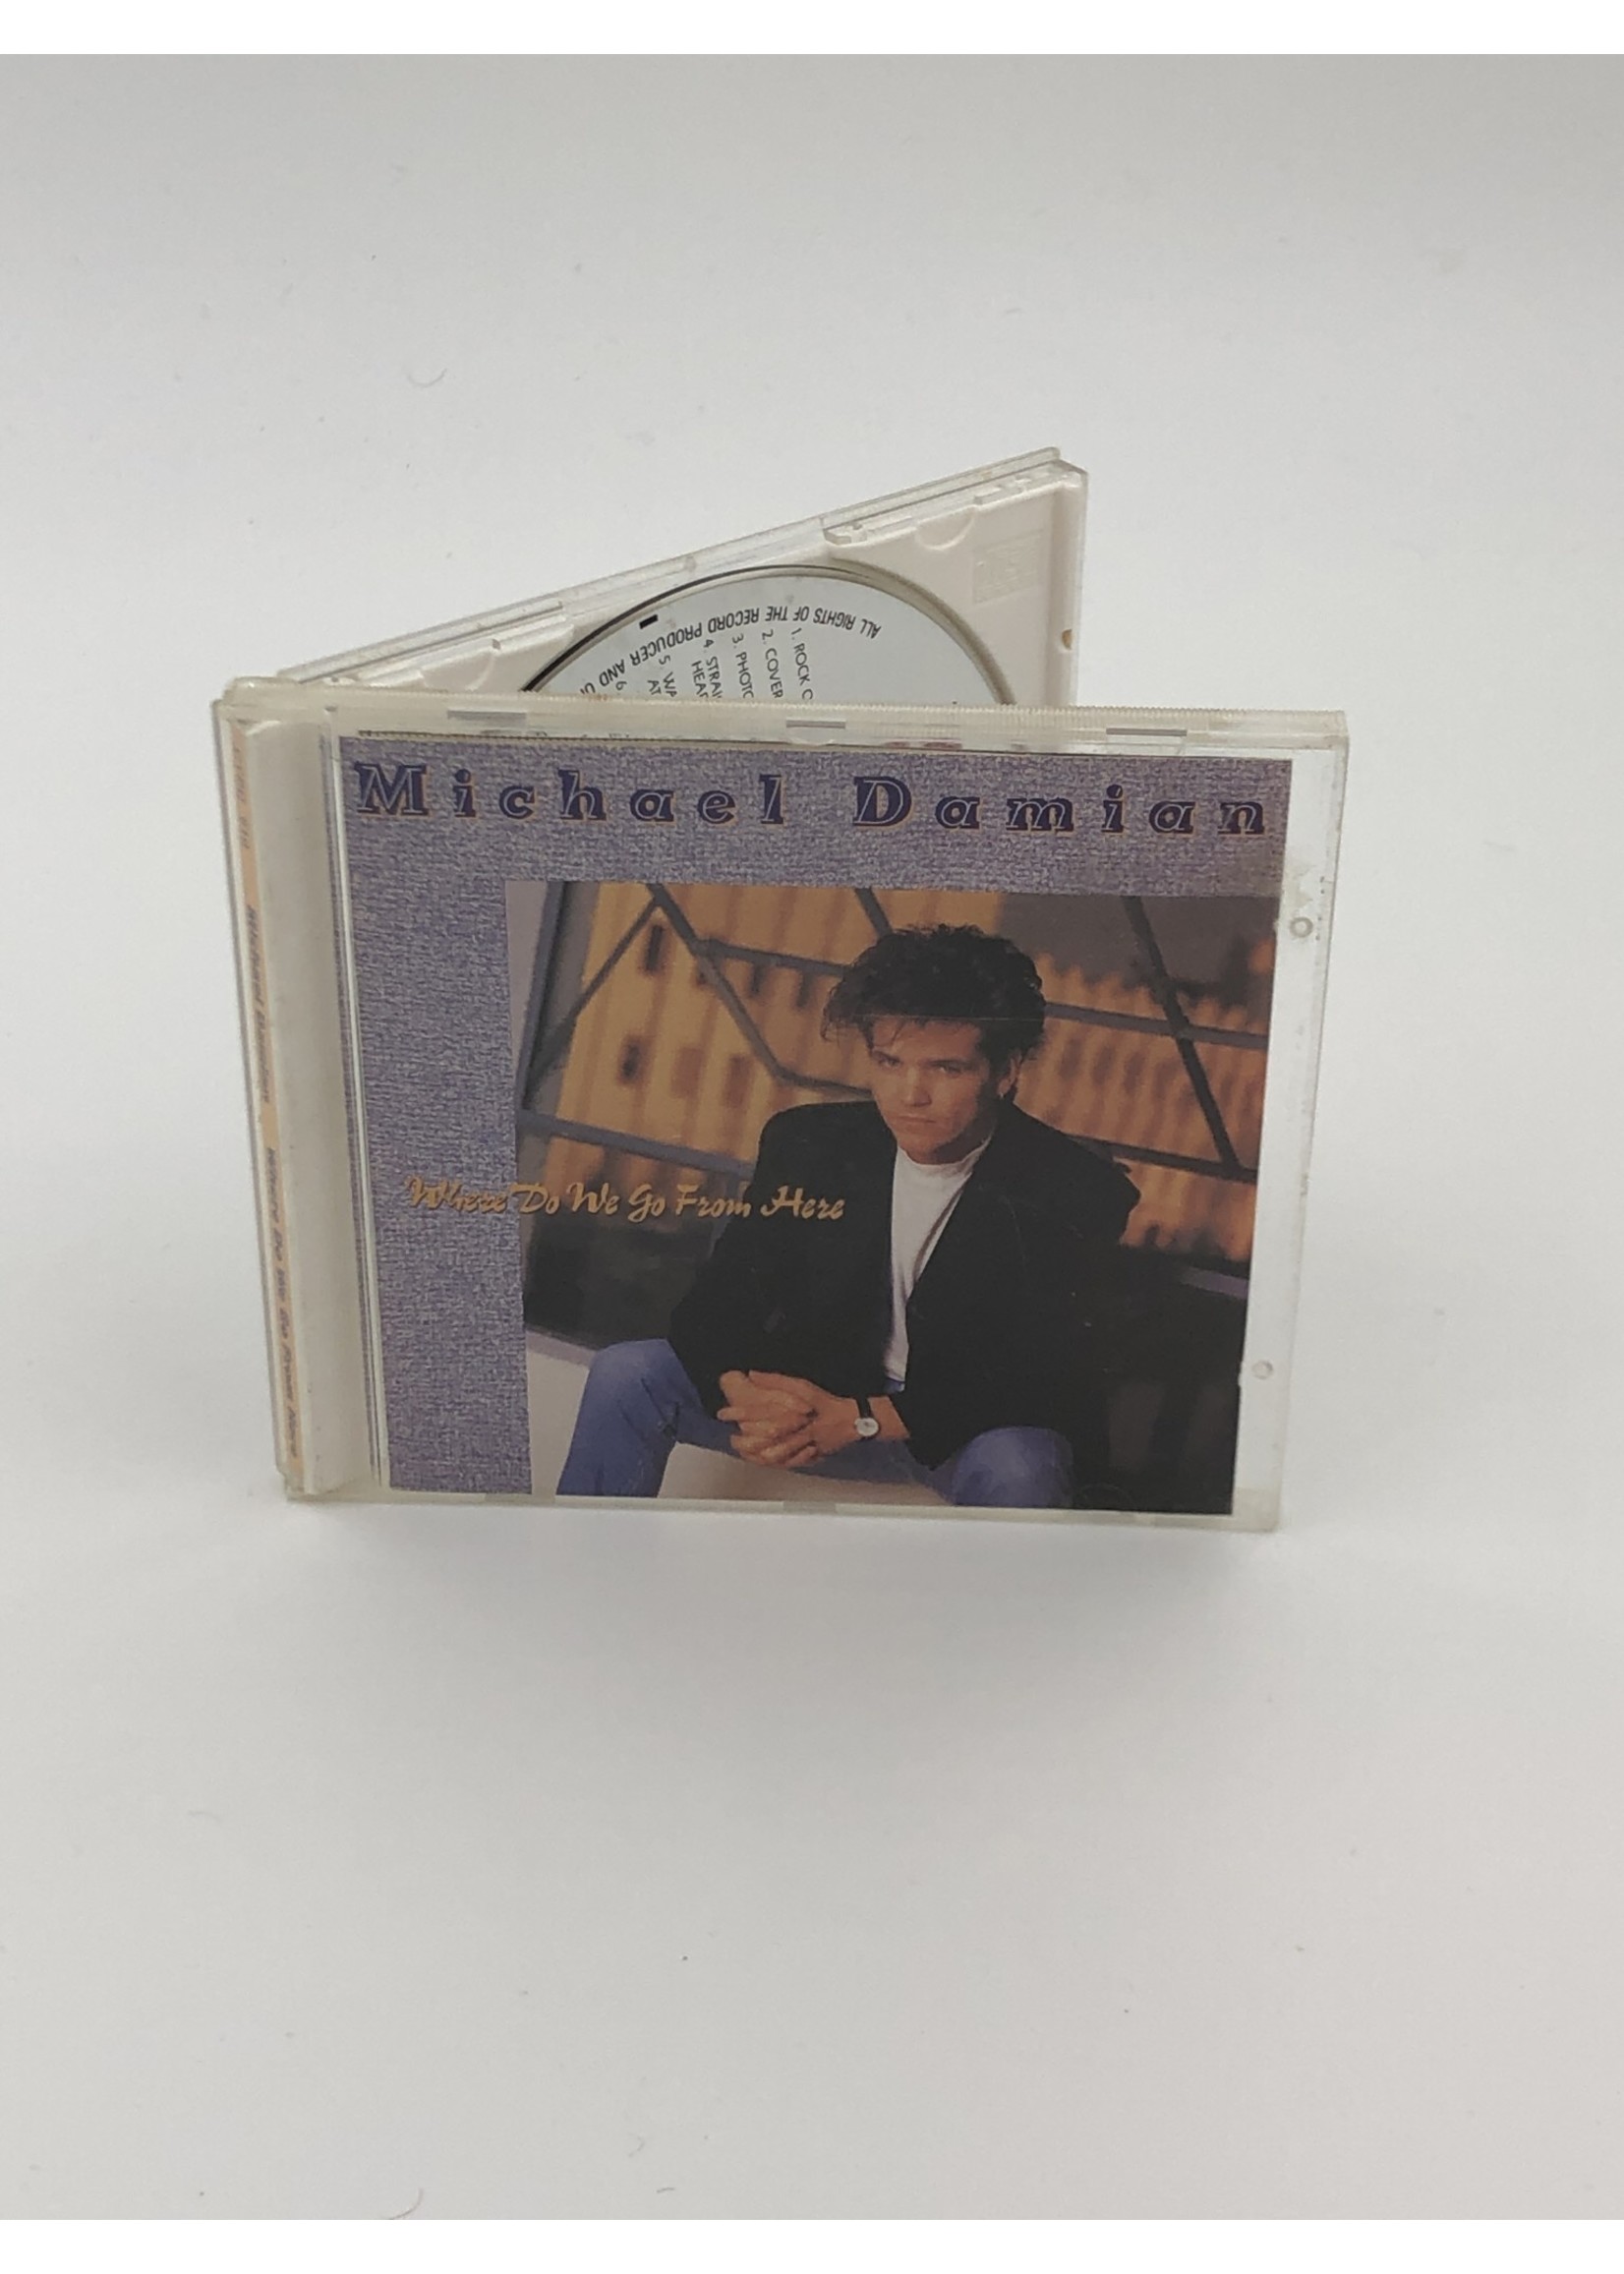 CD Michael Damian: Where do we go from Here CD